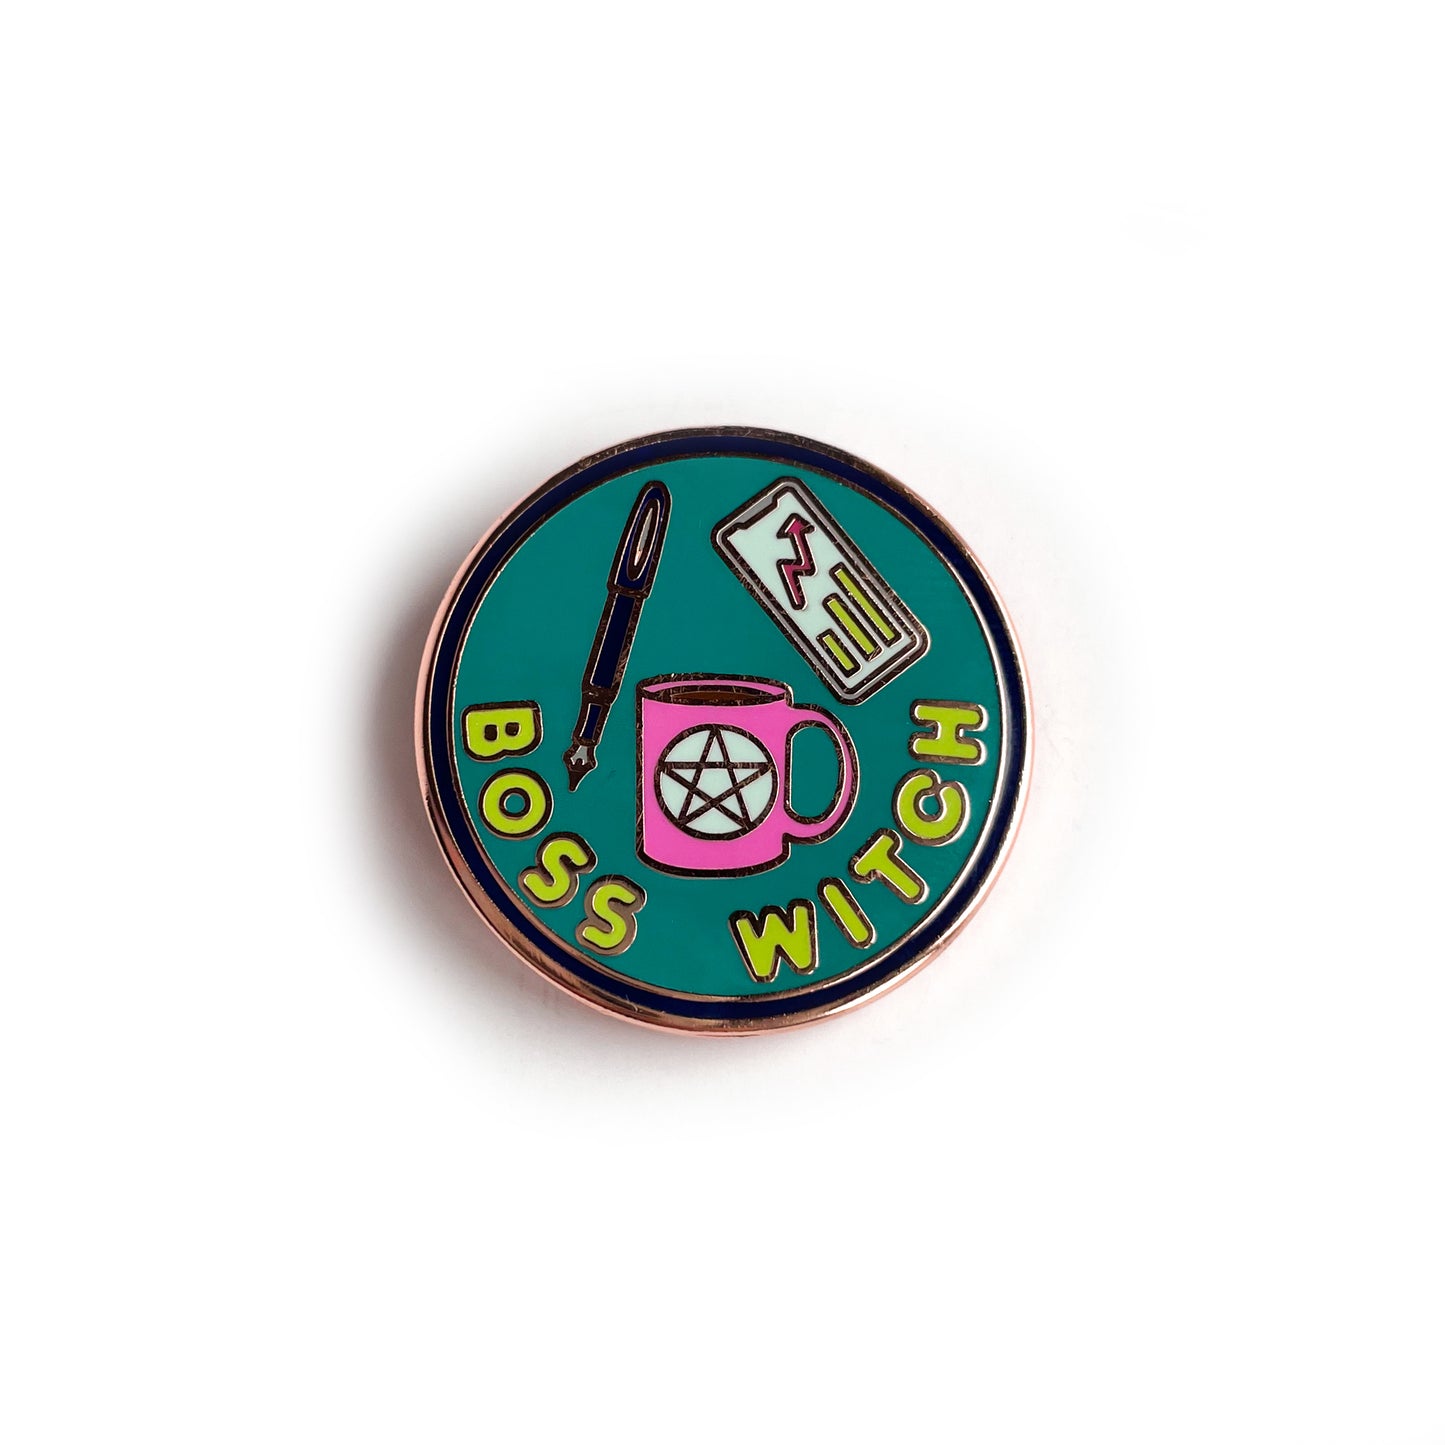 A circular enamel pin with copper details. It has a purple border with a turquoise background with lime green letters that read "Boss Witch". There is also a hot pink coffee cup with a pentacle, a purple fountain pen, and a phone with a graph on it. 